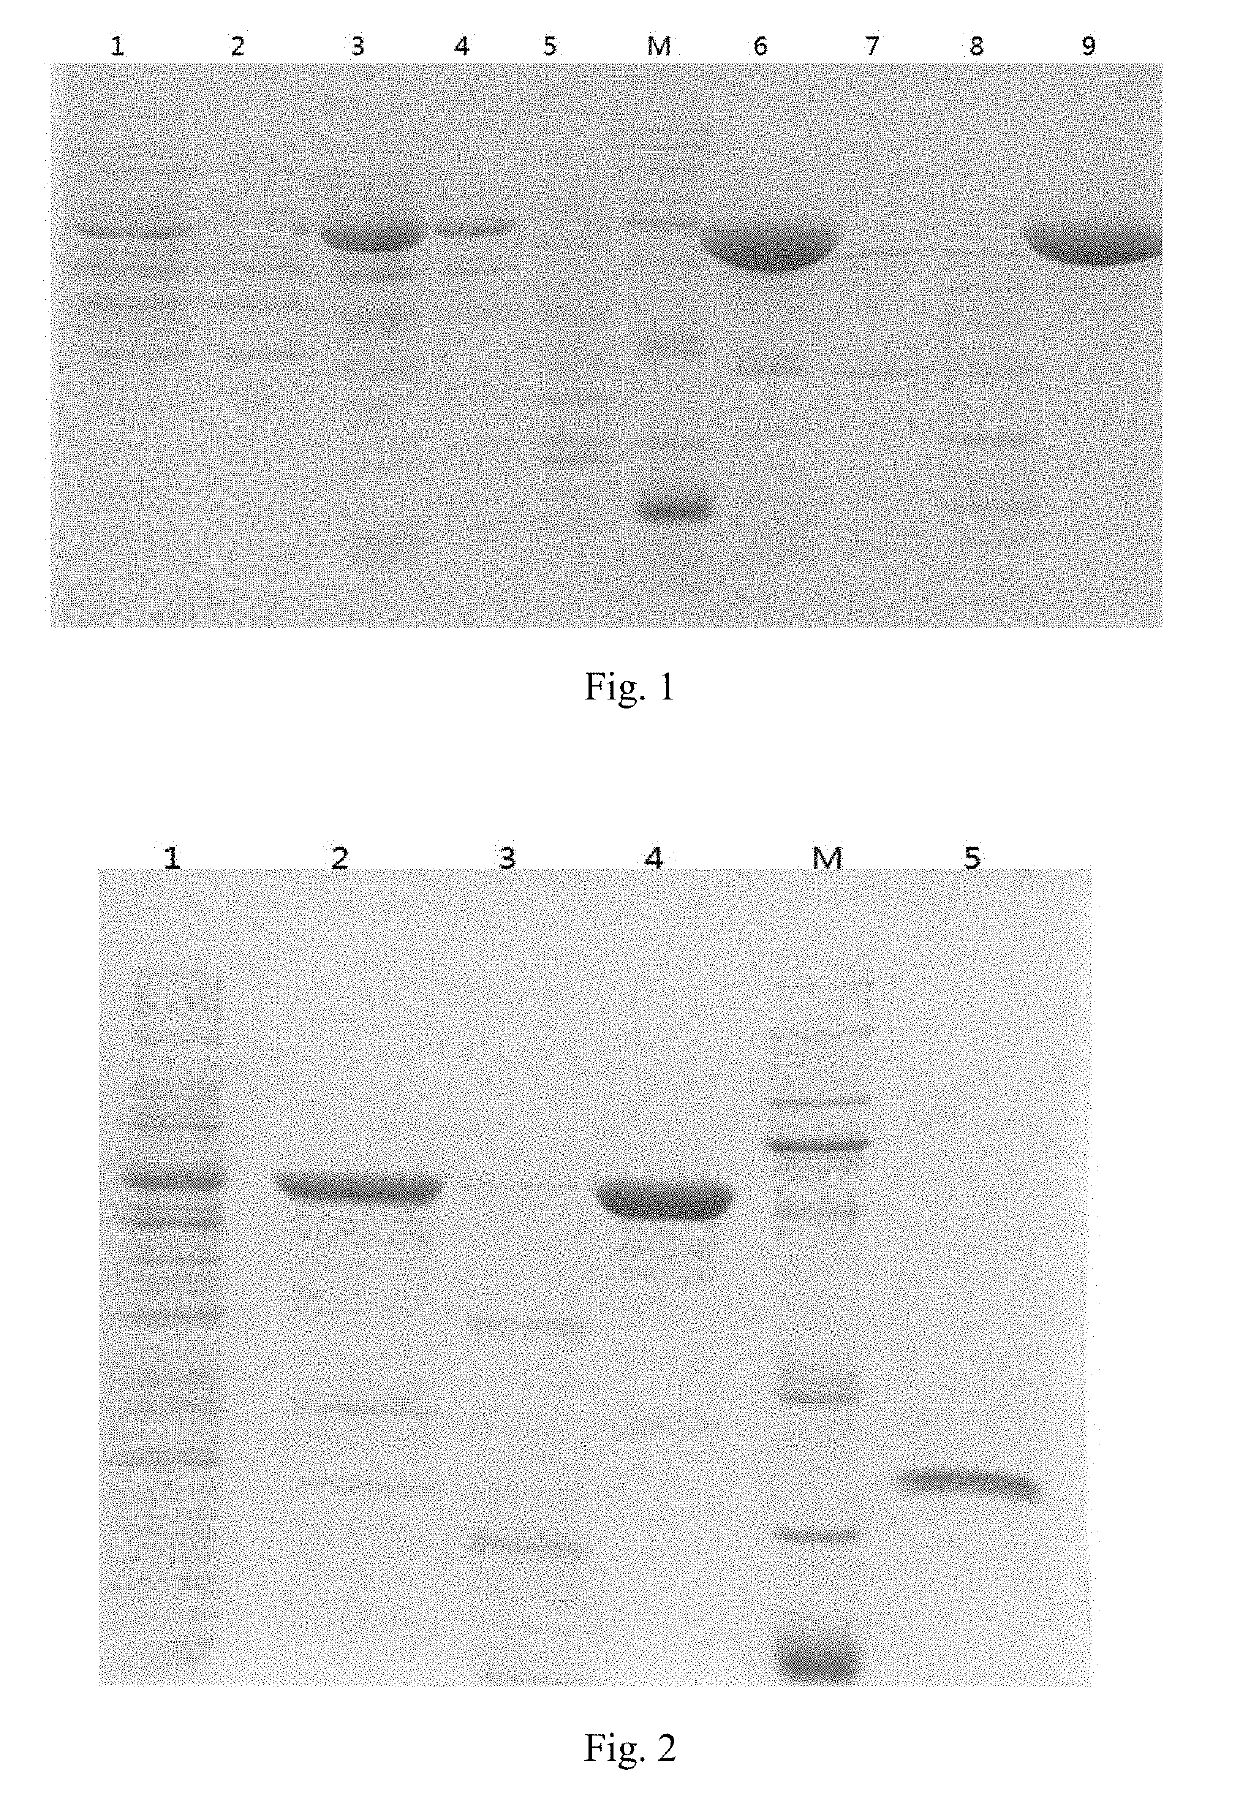 Immunogenic composition for preventing pneumococcal diseases and preparation method thereof